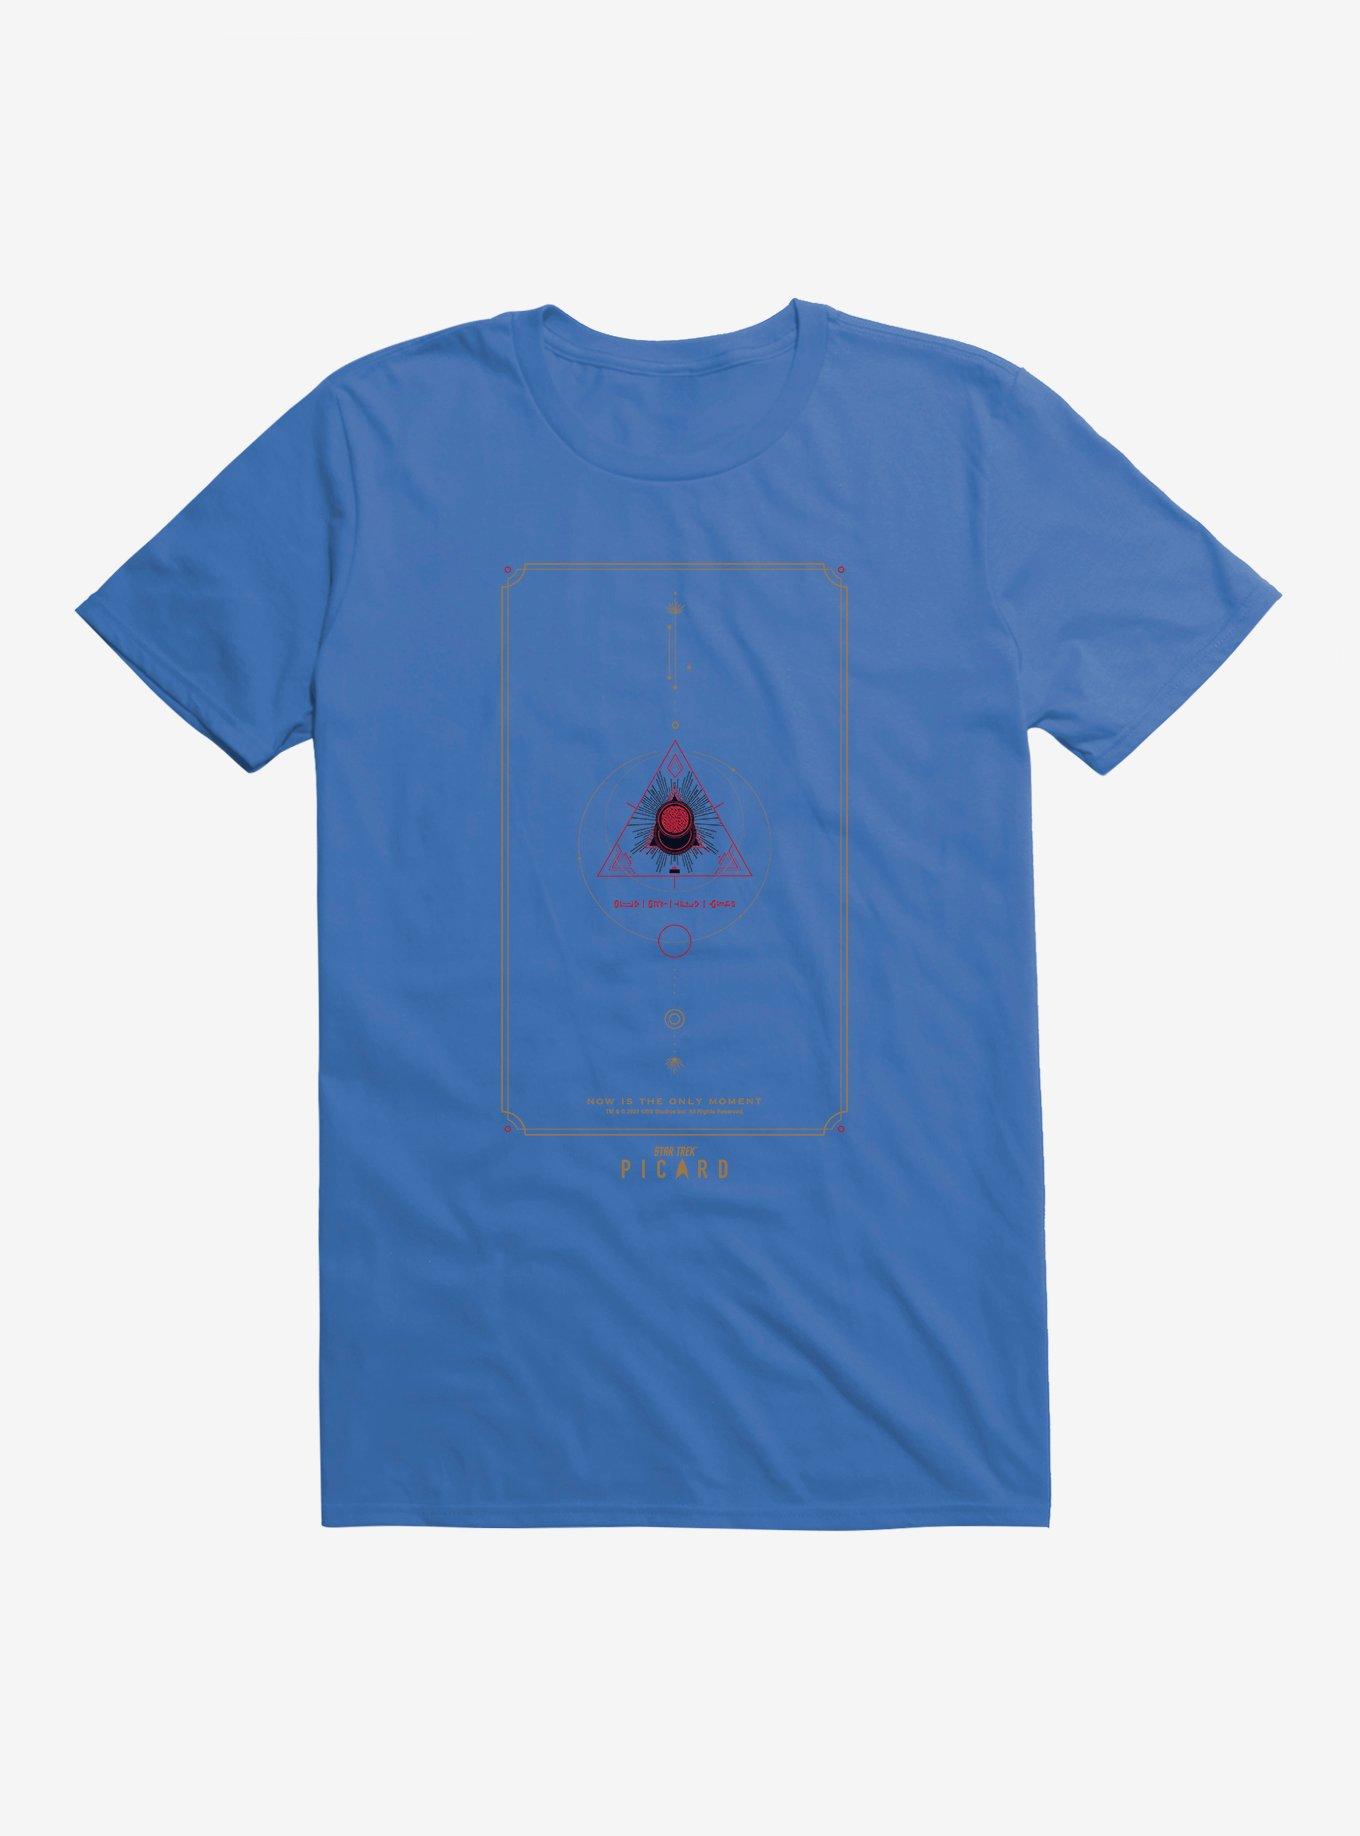 Star Trek: Picard Now Is The Only Moment T-Shirt